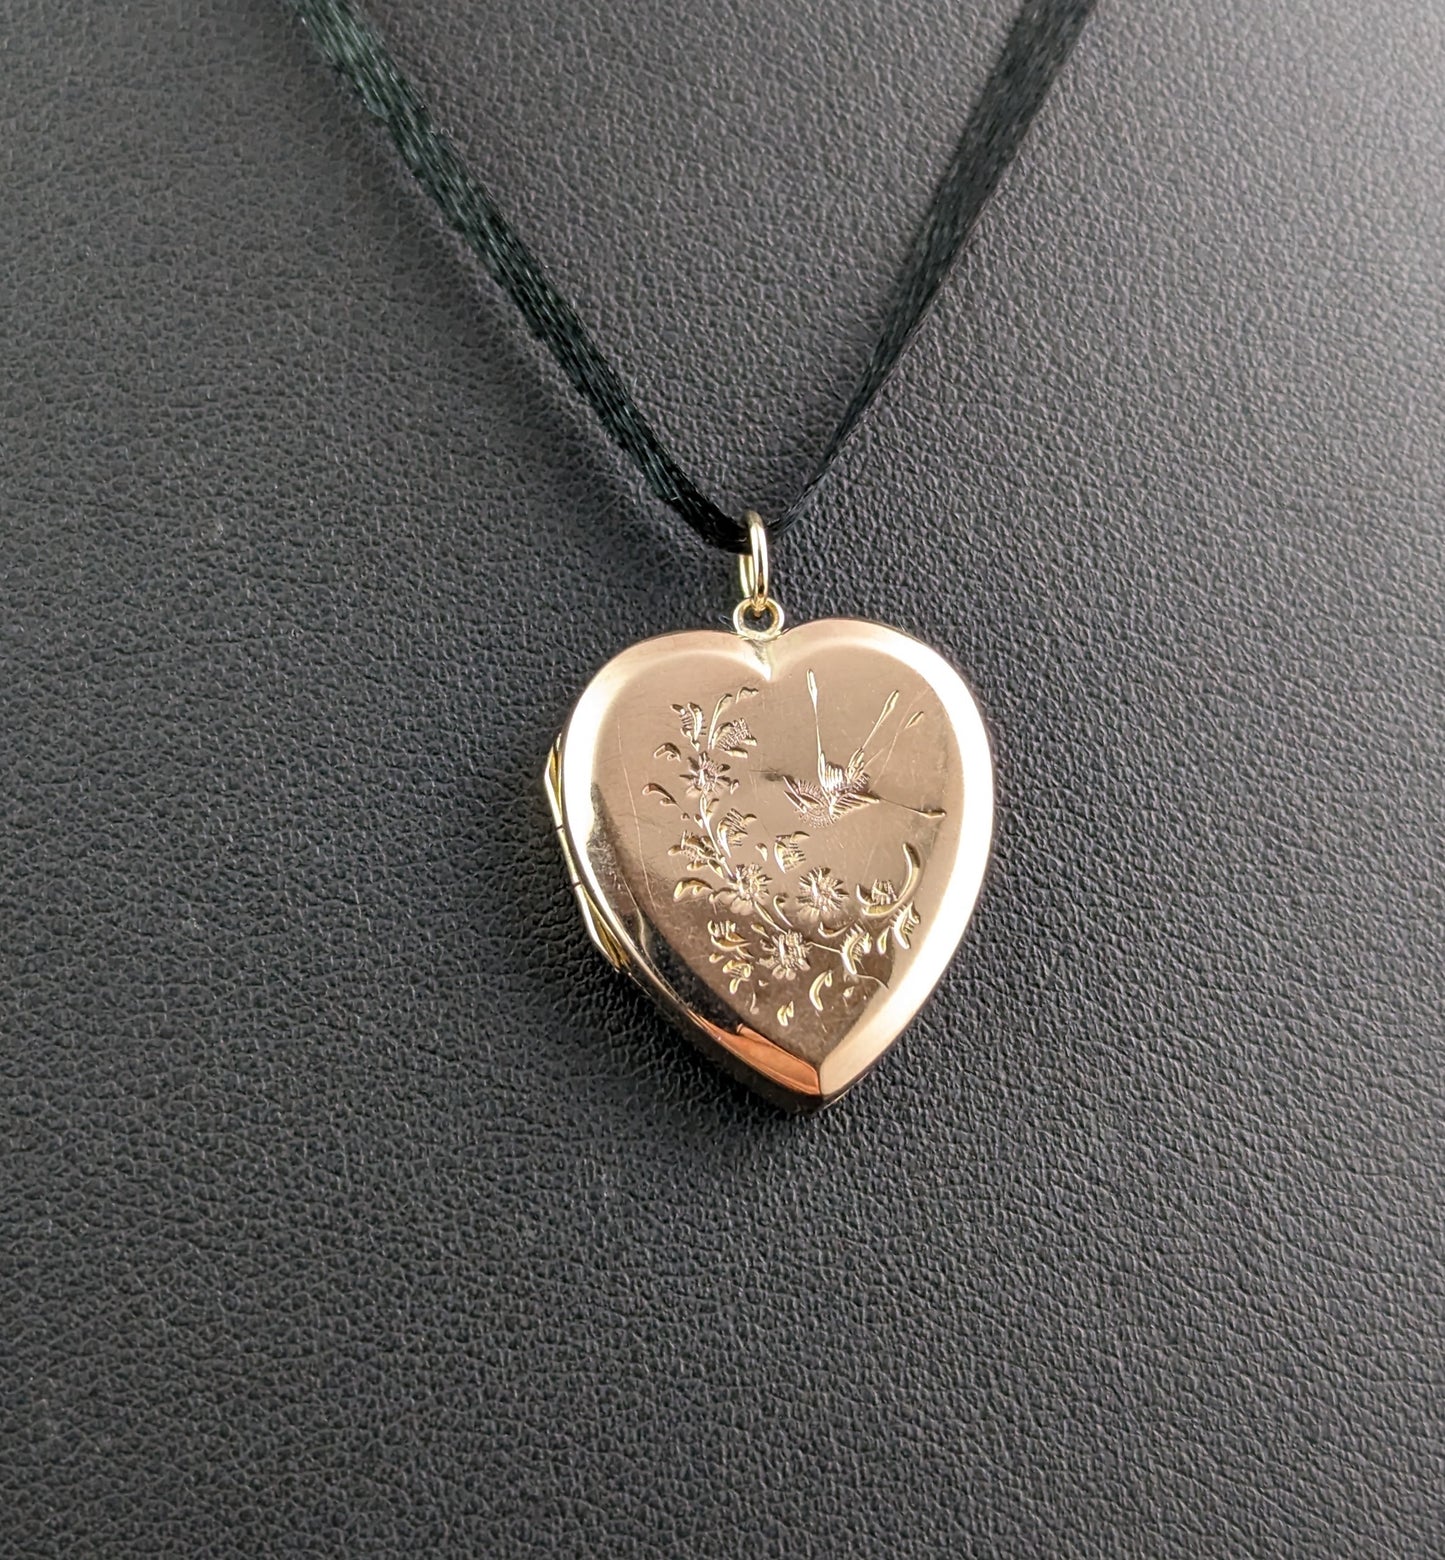 Antique love heart locket pendant, 9ct gold front and back, Edwardian